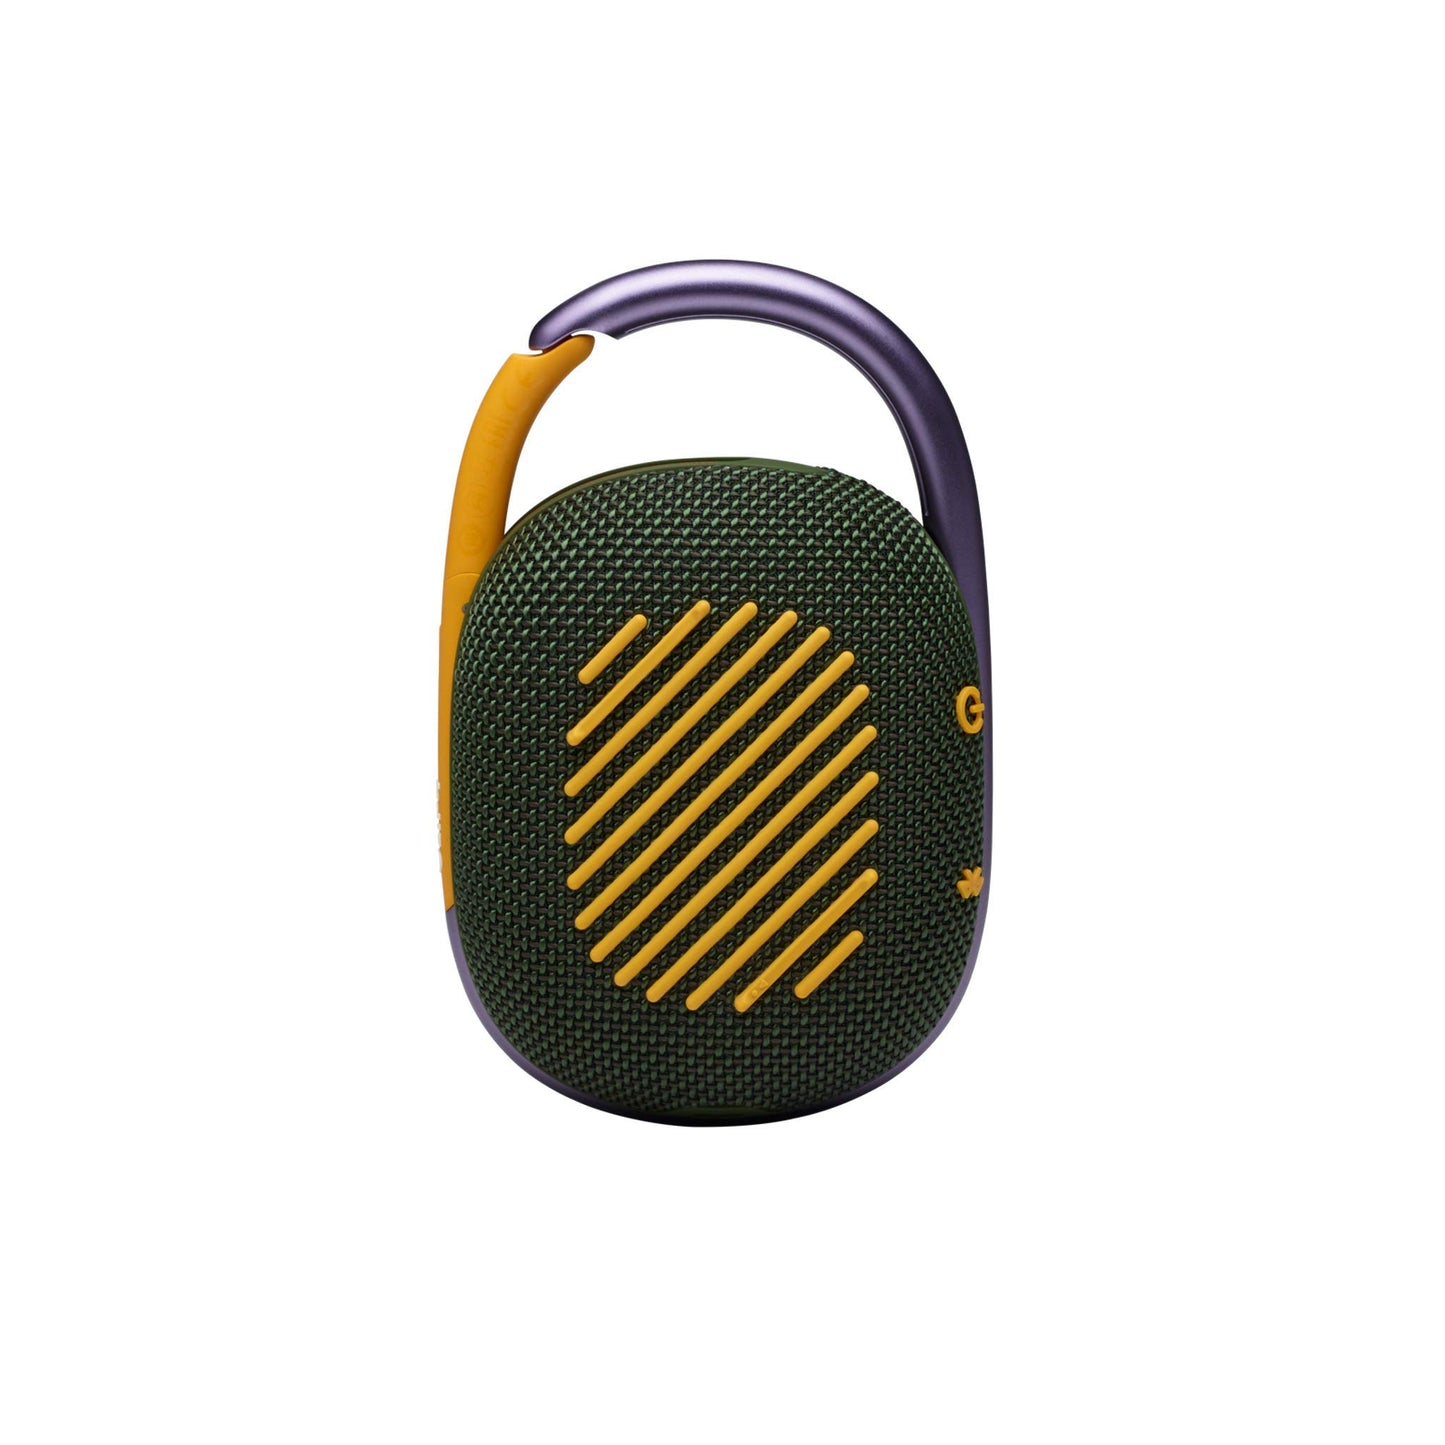 JBL Clip 4 Bluetooth portable speaker with integrated carabiner, waterproof and dustproof, 10H Battery - Green